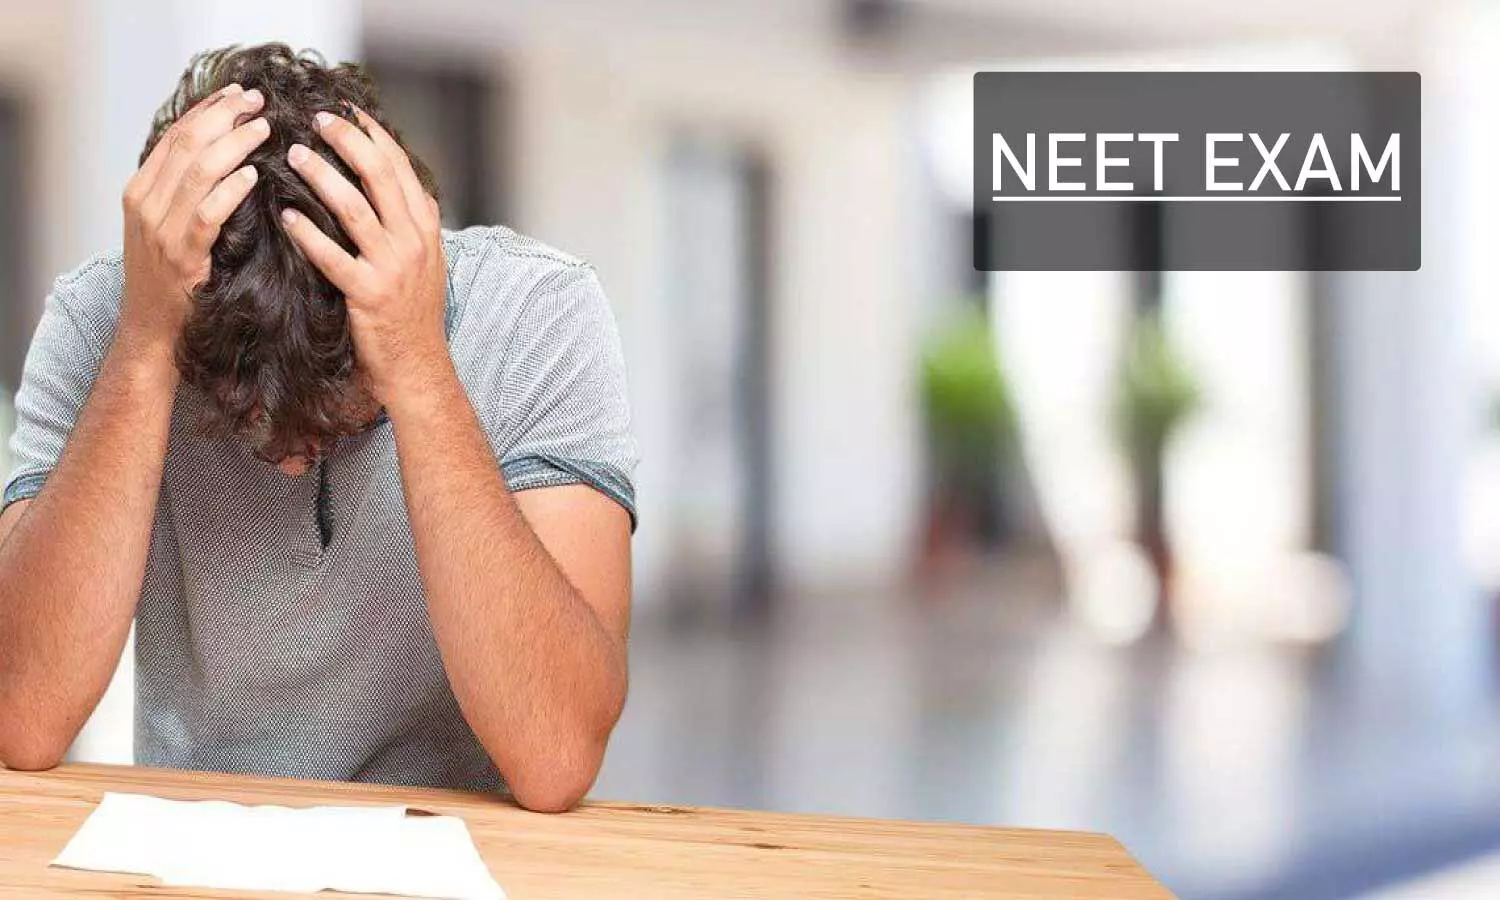 Four students from Maharashtras tribal communities clear NEET 2022